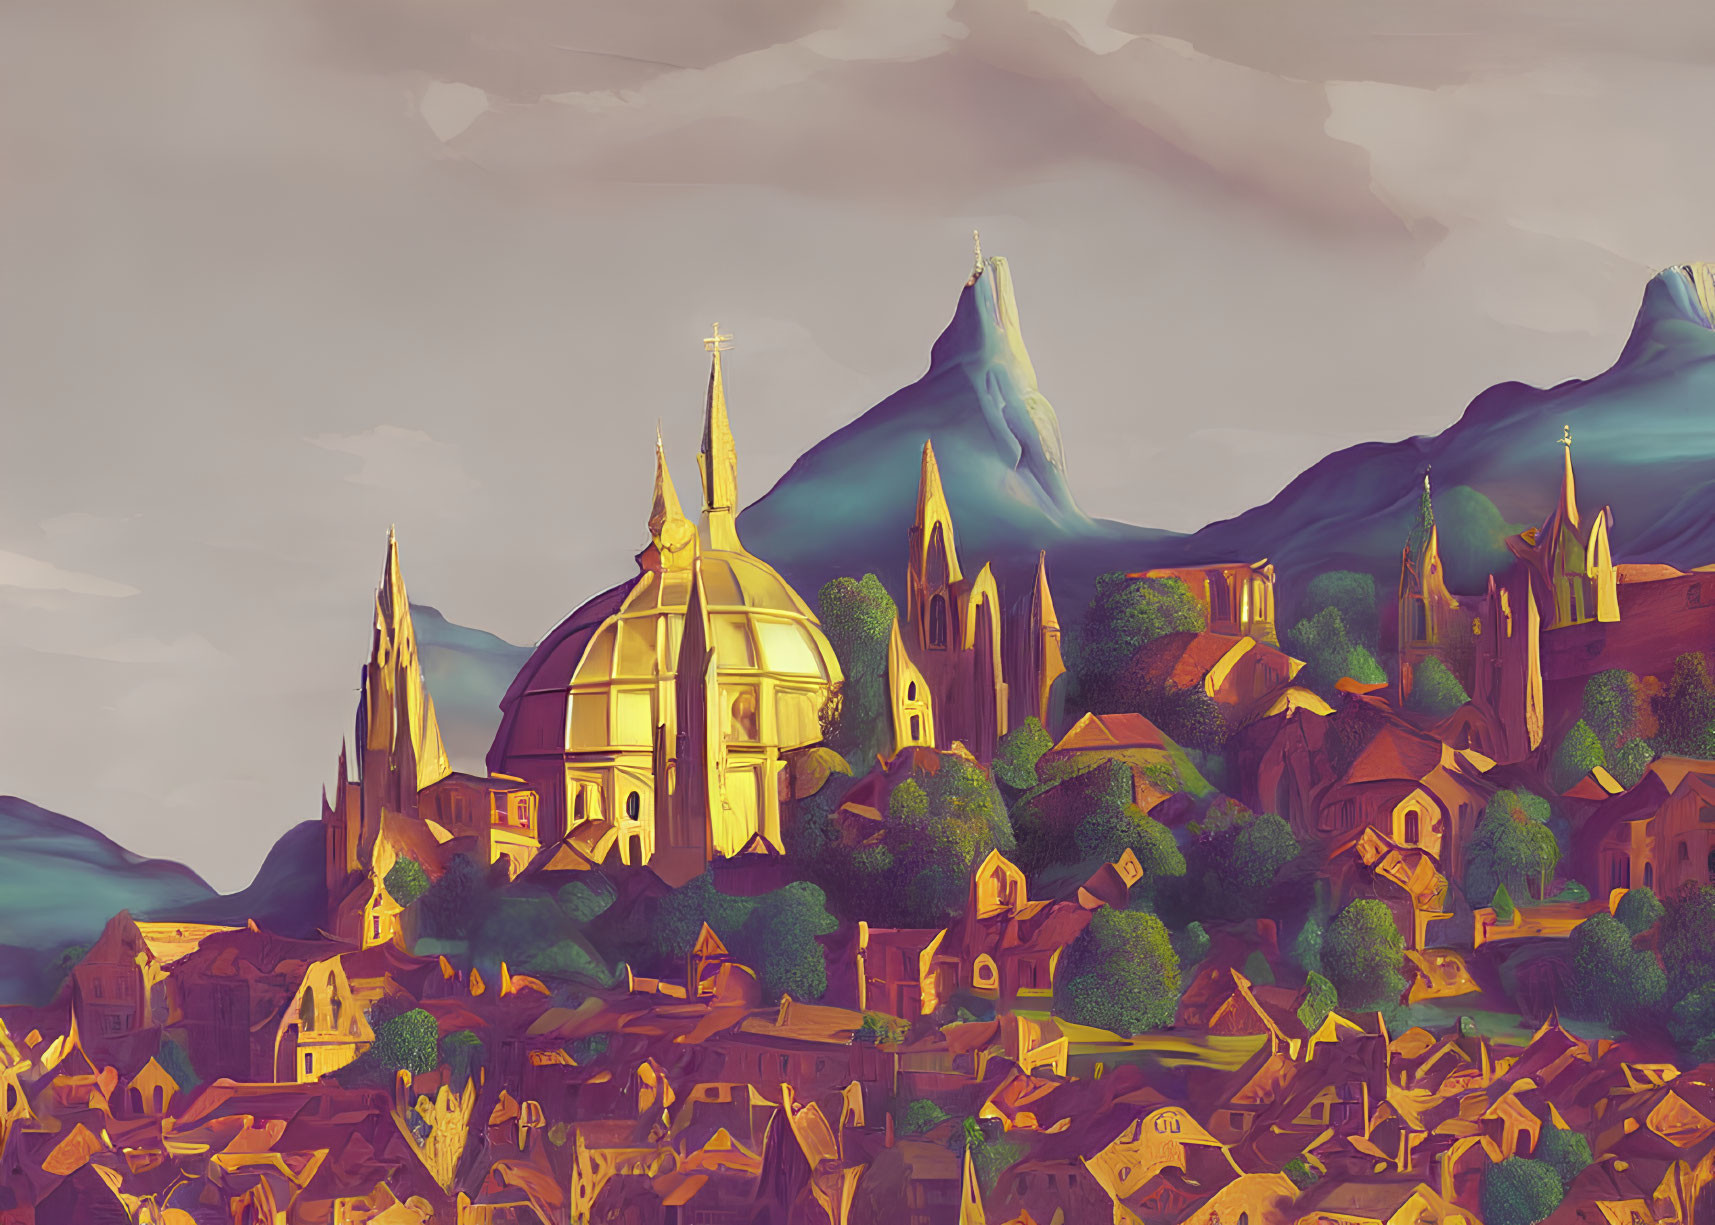 Historical town artwork with cathedrals and mountains